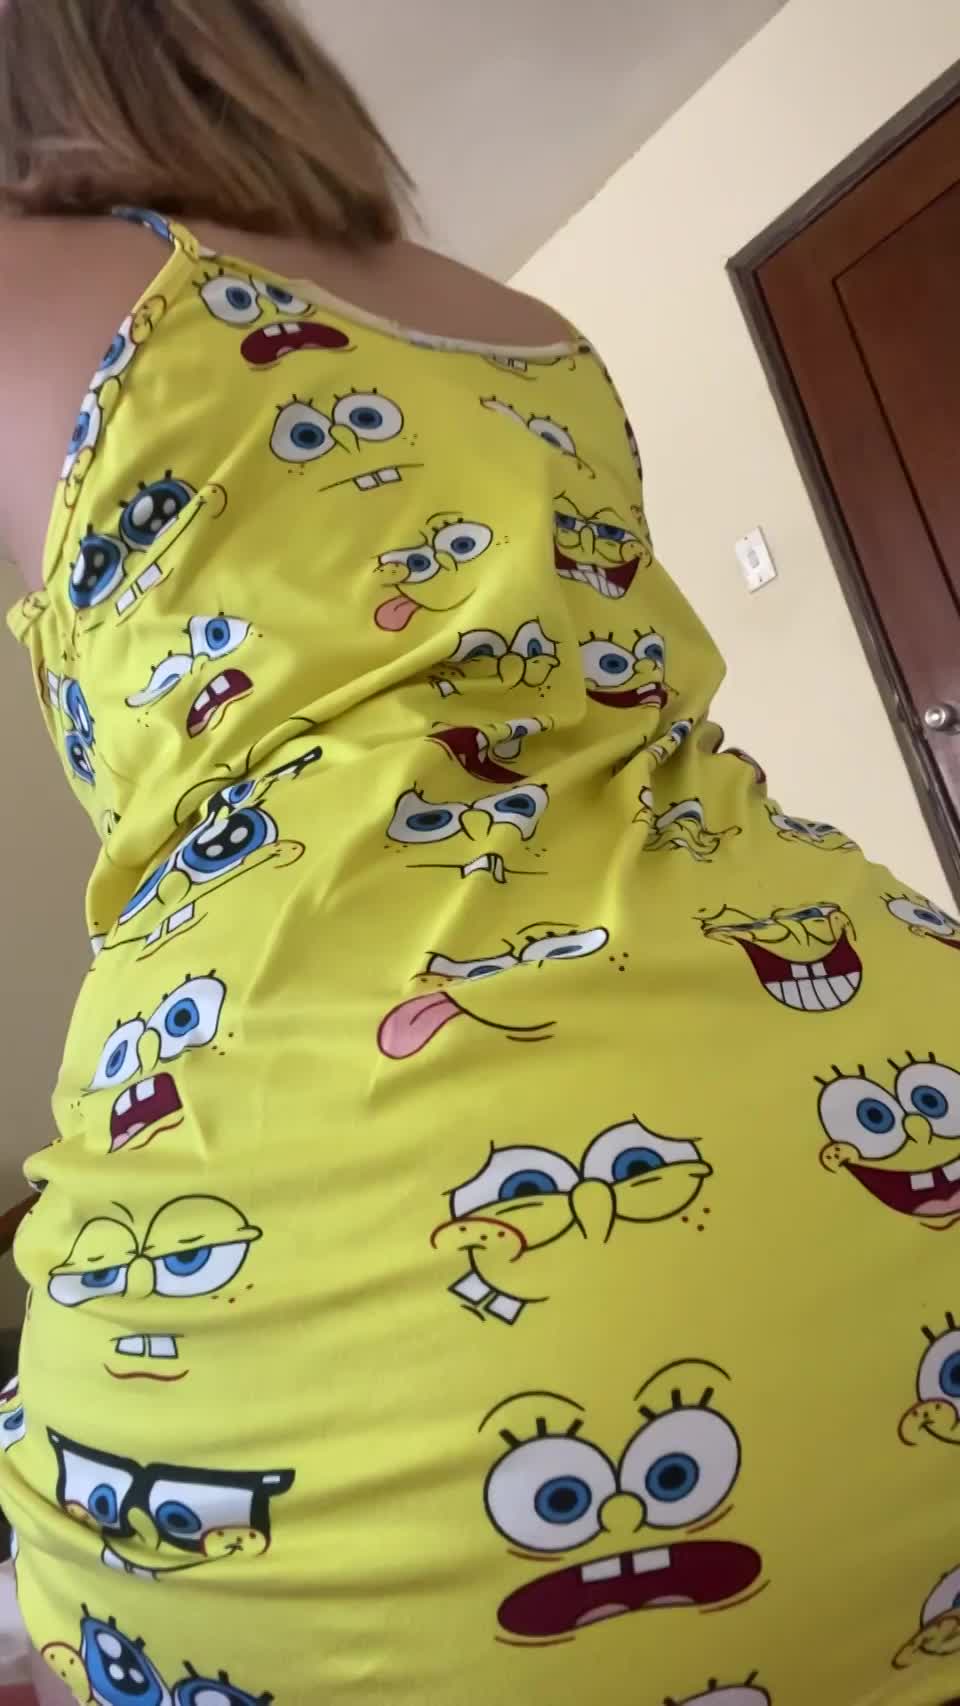 After seeing spongebob let's fuck, my asshole asks for cock : video clip